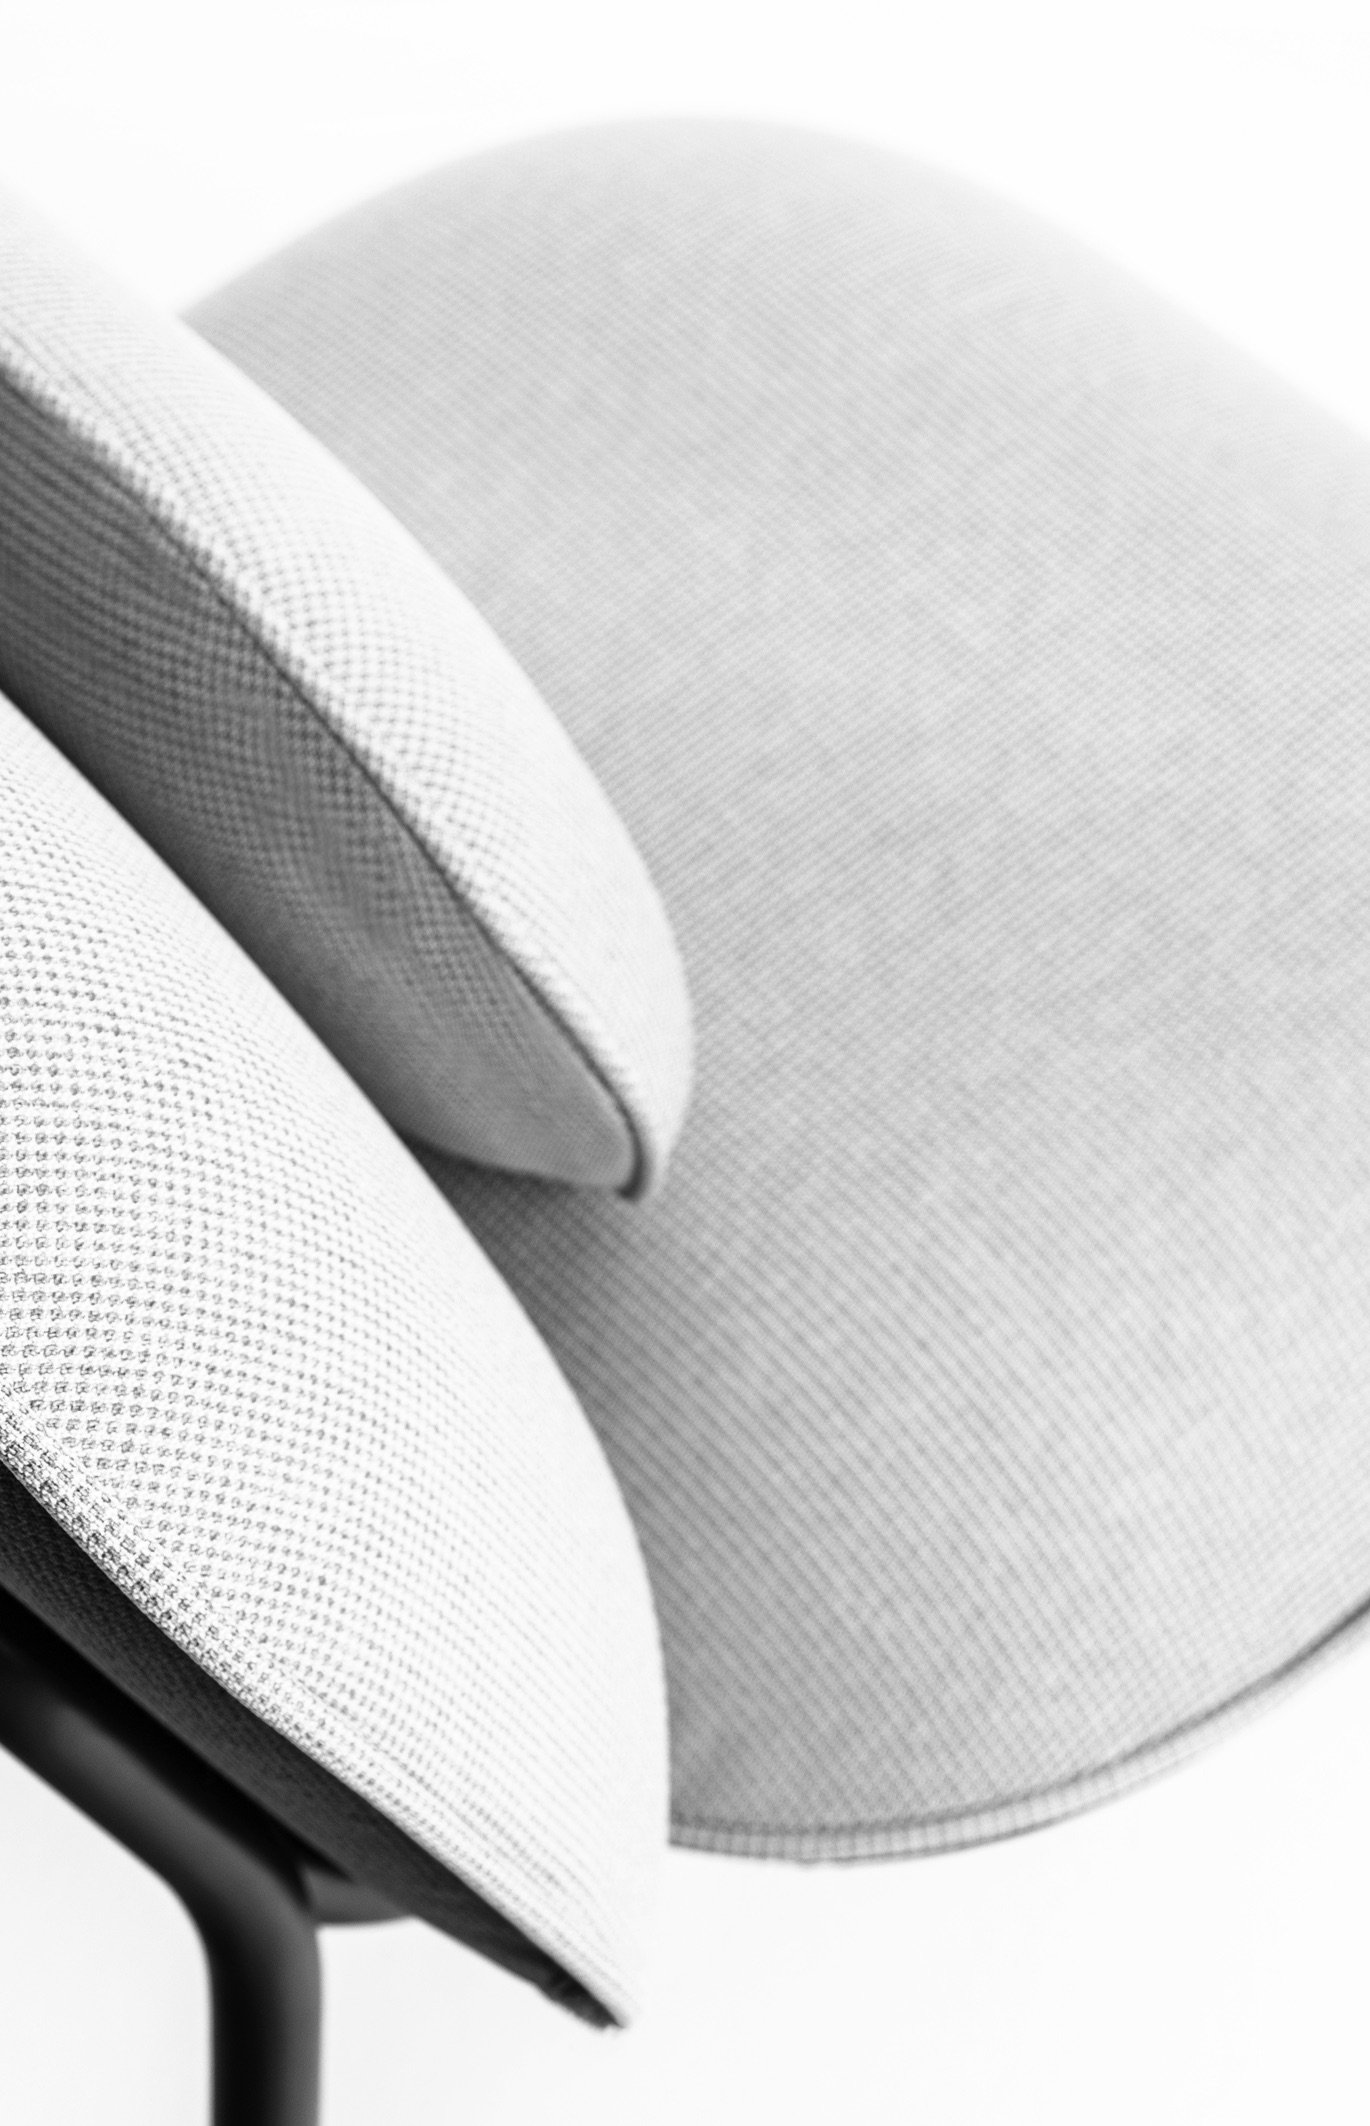 Tasca Lounge Chair by TOOU. Top detail foto, Gray Gabriel Fabric close-up